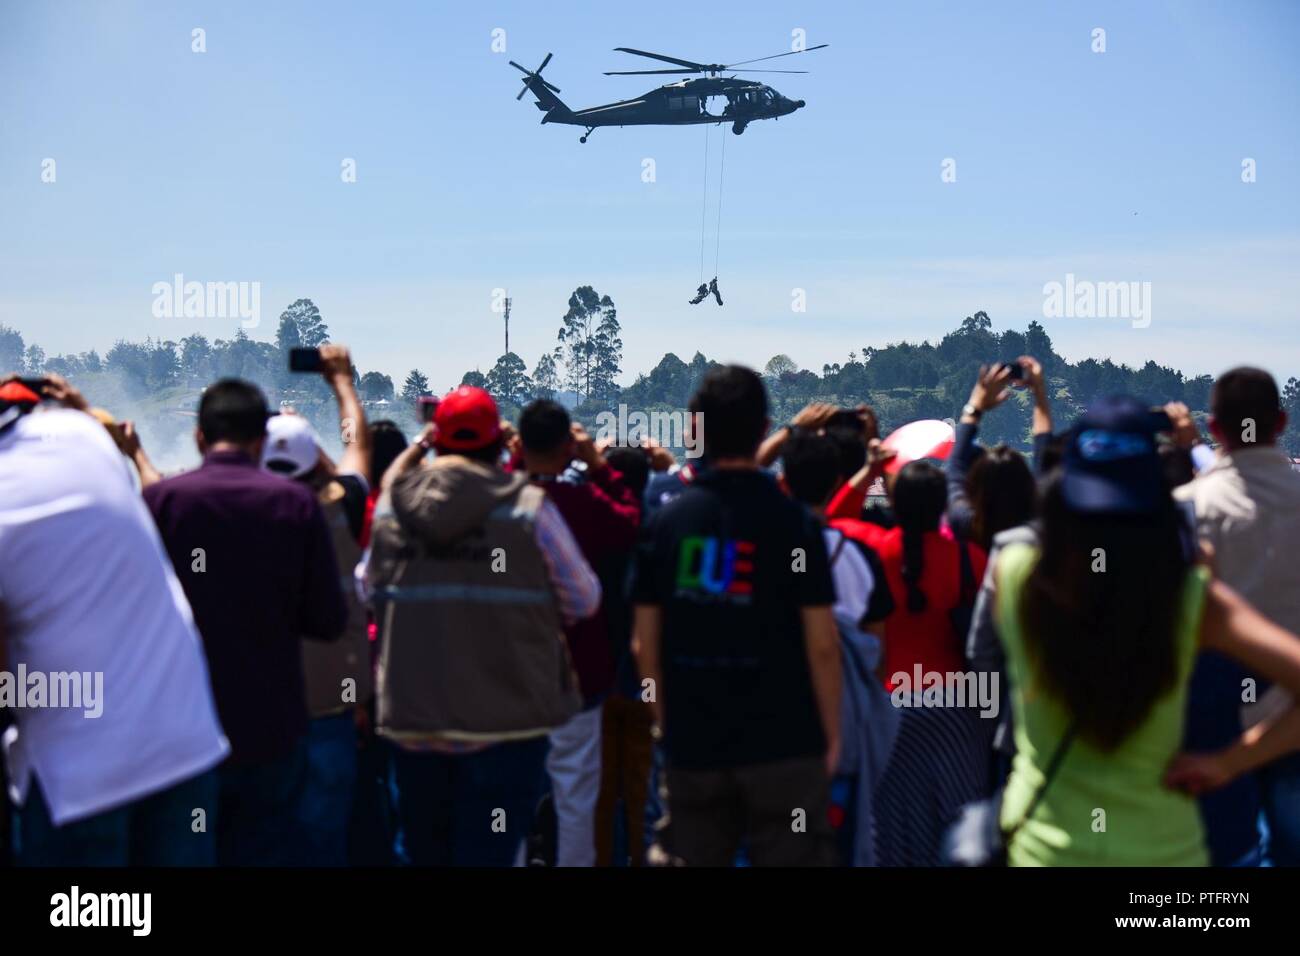 A Colombian UH-60 Black Hawk helicopter participates in Feria Aeronautica Internacional—Colombia 2017 at José María Córdova International Airport in Rionegro, Colombia, July 13, 2017. The United States Air Force is participating in the four-day air show with two South Carolina Air National Guard F-16s as static displays, plus static displays of a KC-135, KC-10, along with an F-16 aerial demonstration by the Air Combat Command’s Viper East Demo Team. United States military participation in the air show provides an opportunity to strengthen our military-to-military relationships with regional pa Stock Photo